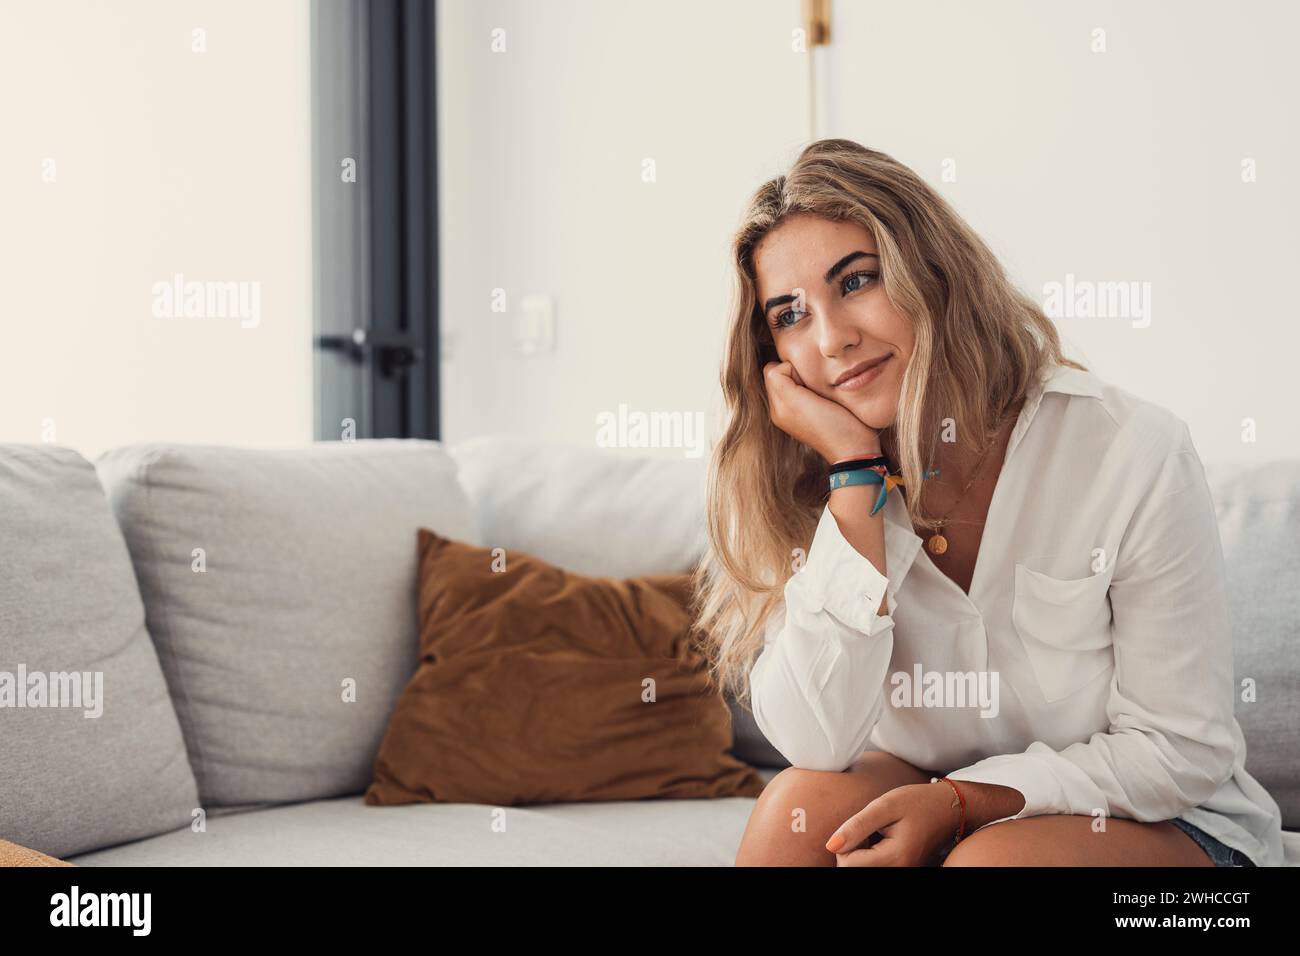 Happy young woman look in distance feeling positive and optimistic, dream or visualizing of new beginning, smiling millennial girl thinking overjoyed excited for future, happiness, good mood concept Stock Photo